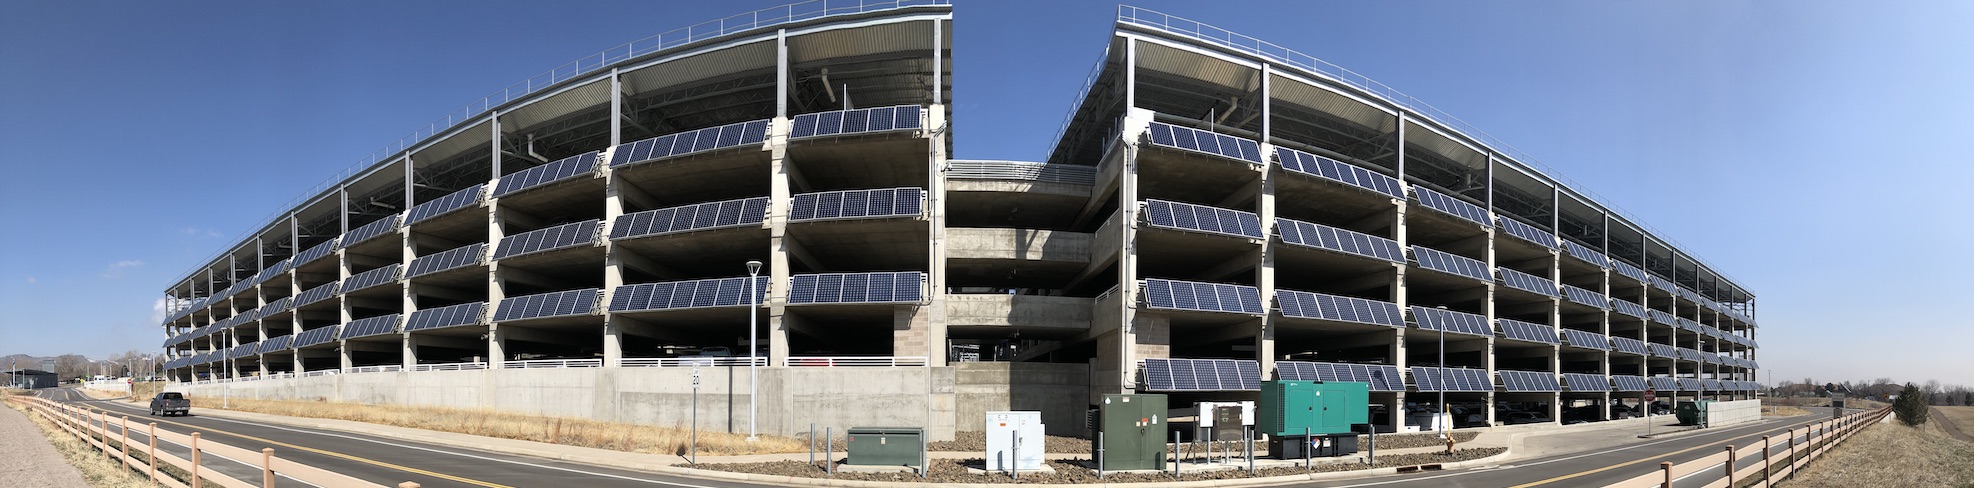 Panoramic view of the NREL garage which is covered in solar panels.